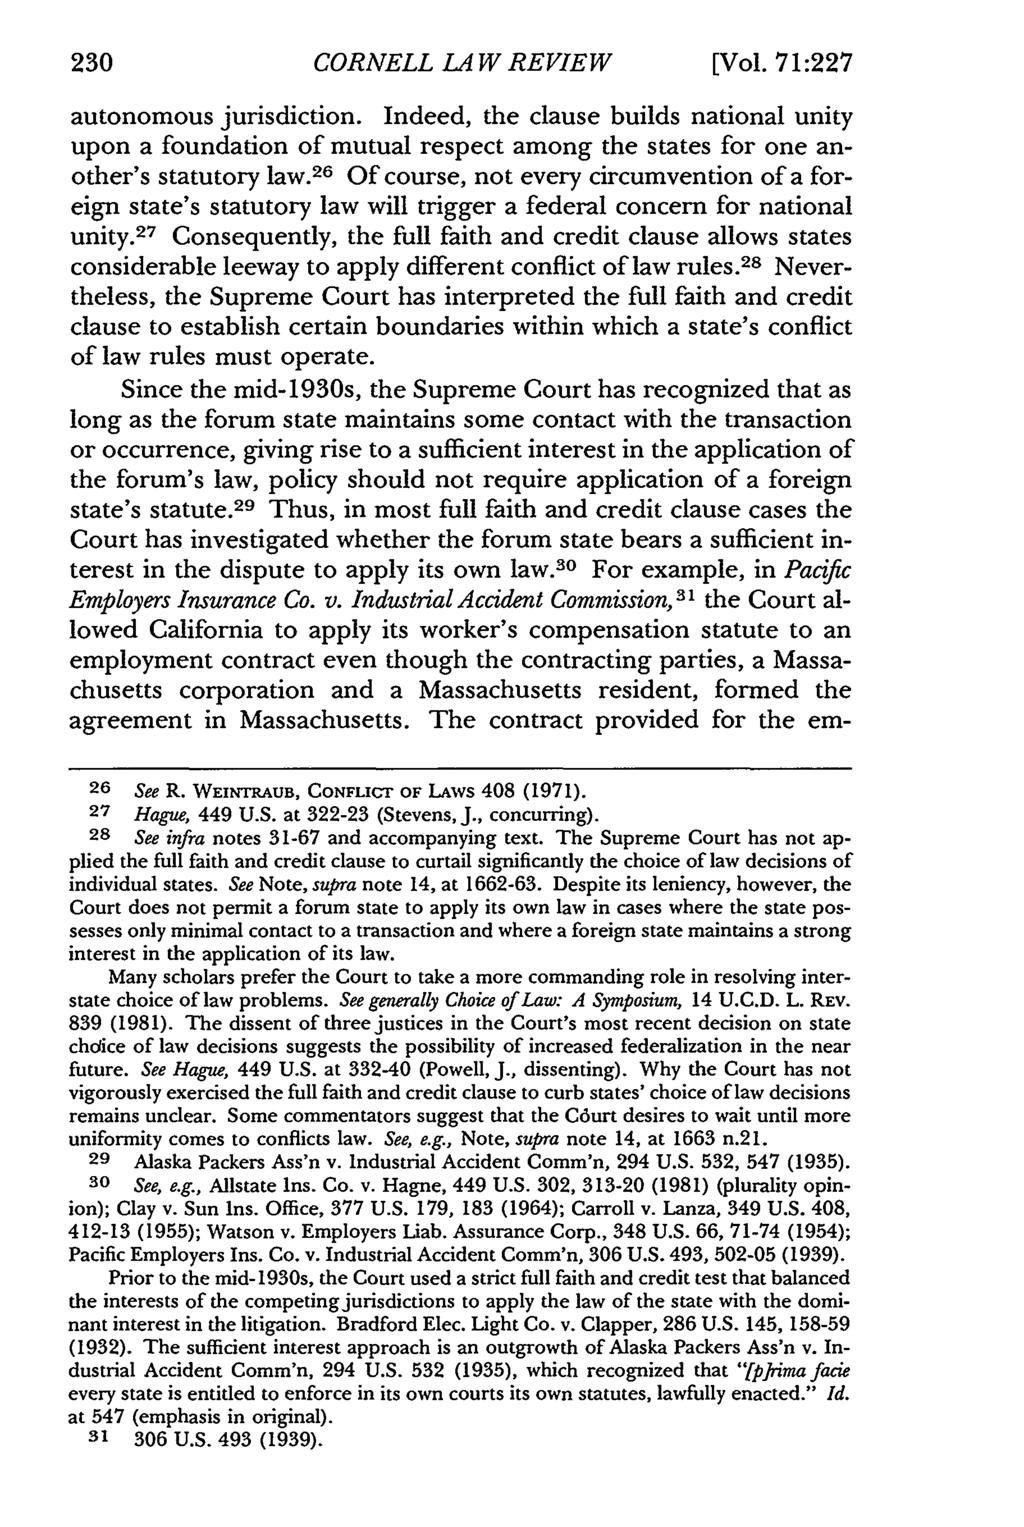 CORNELL LA W REVIEW [Vol. 71:227 autonomous jurisdiction. Indeed, the clause builds national unity upon a foundation of mutual respect among the states for one another's statutory law.